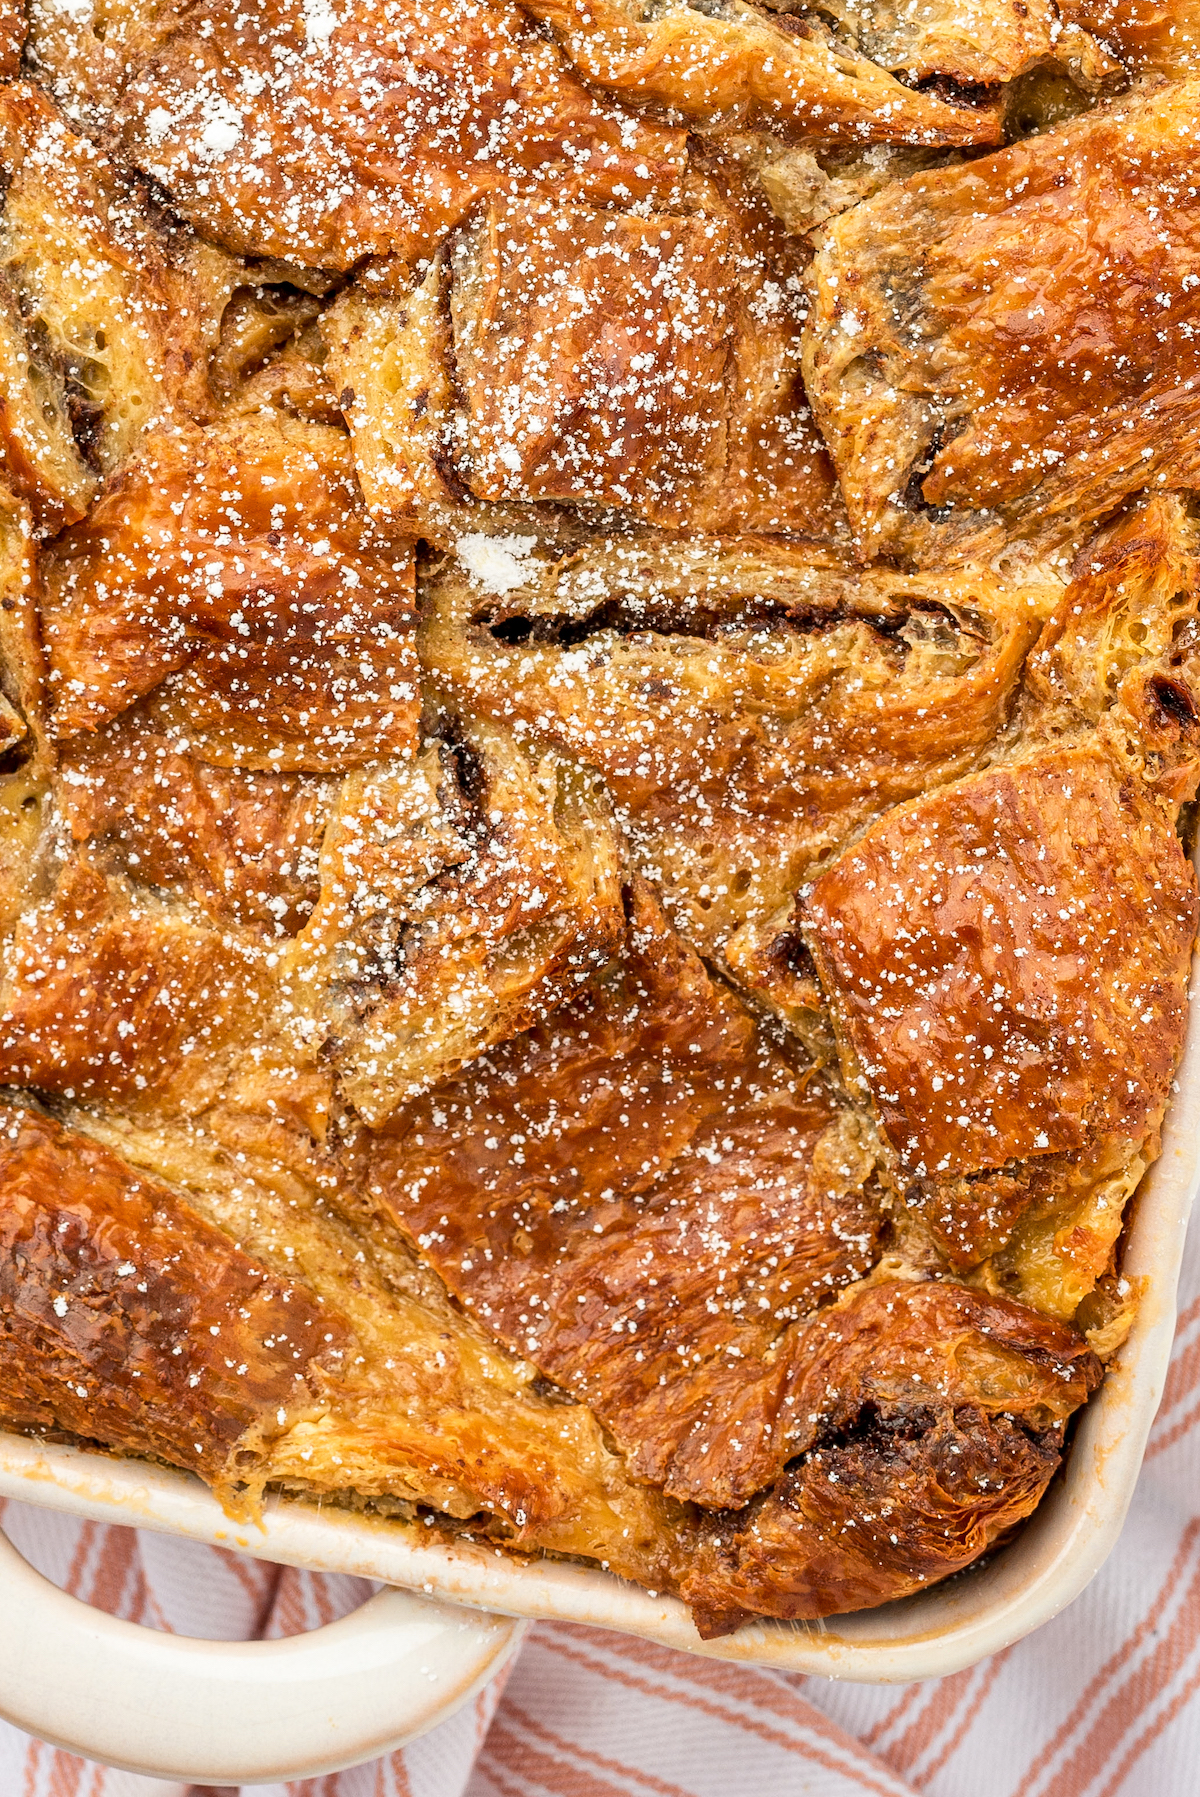 Close-up shot of bread pudding made with chocolate hazelnut spread and croissant chunks.